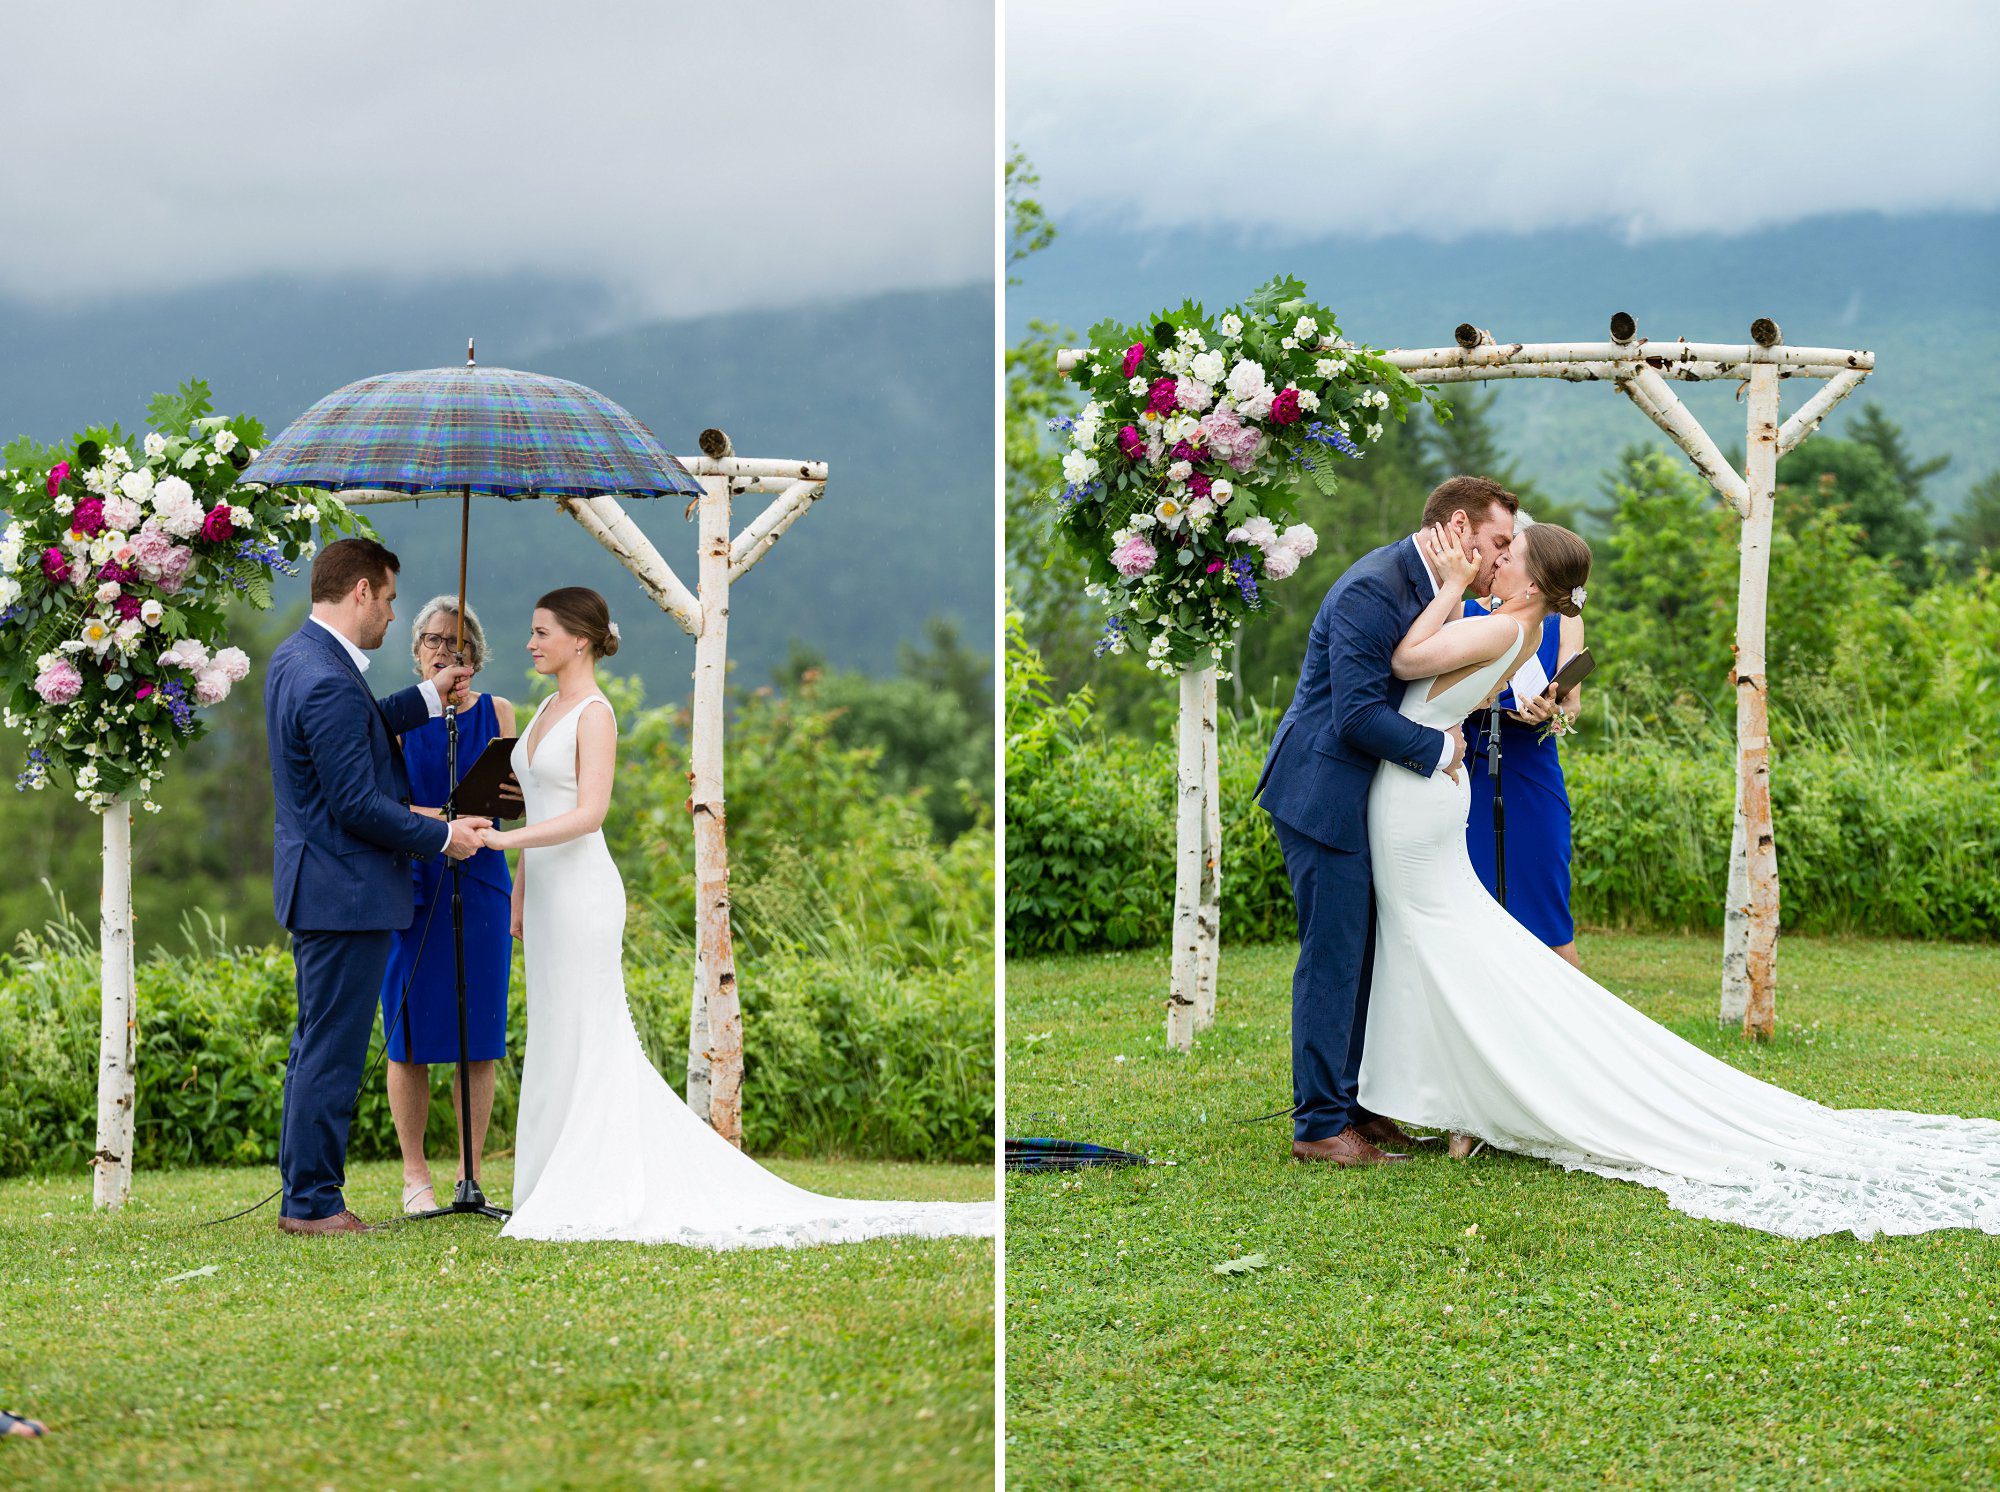 Beautiful July Wedding at The Toad Hill Farm in Franconia, NH | Erika Follansbee Photography